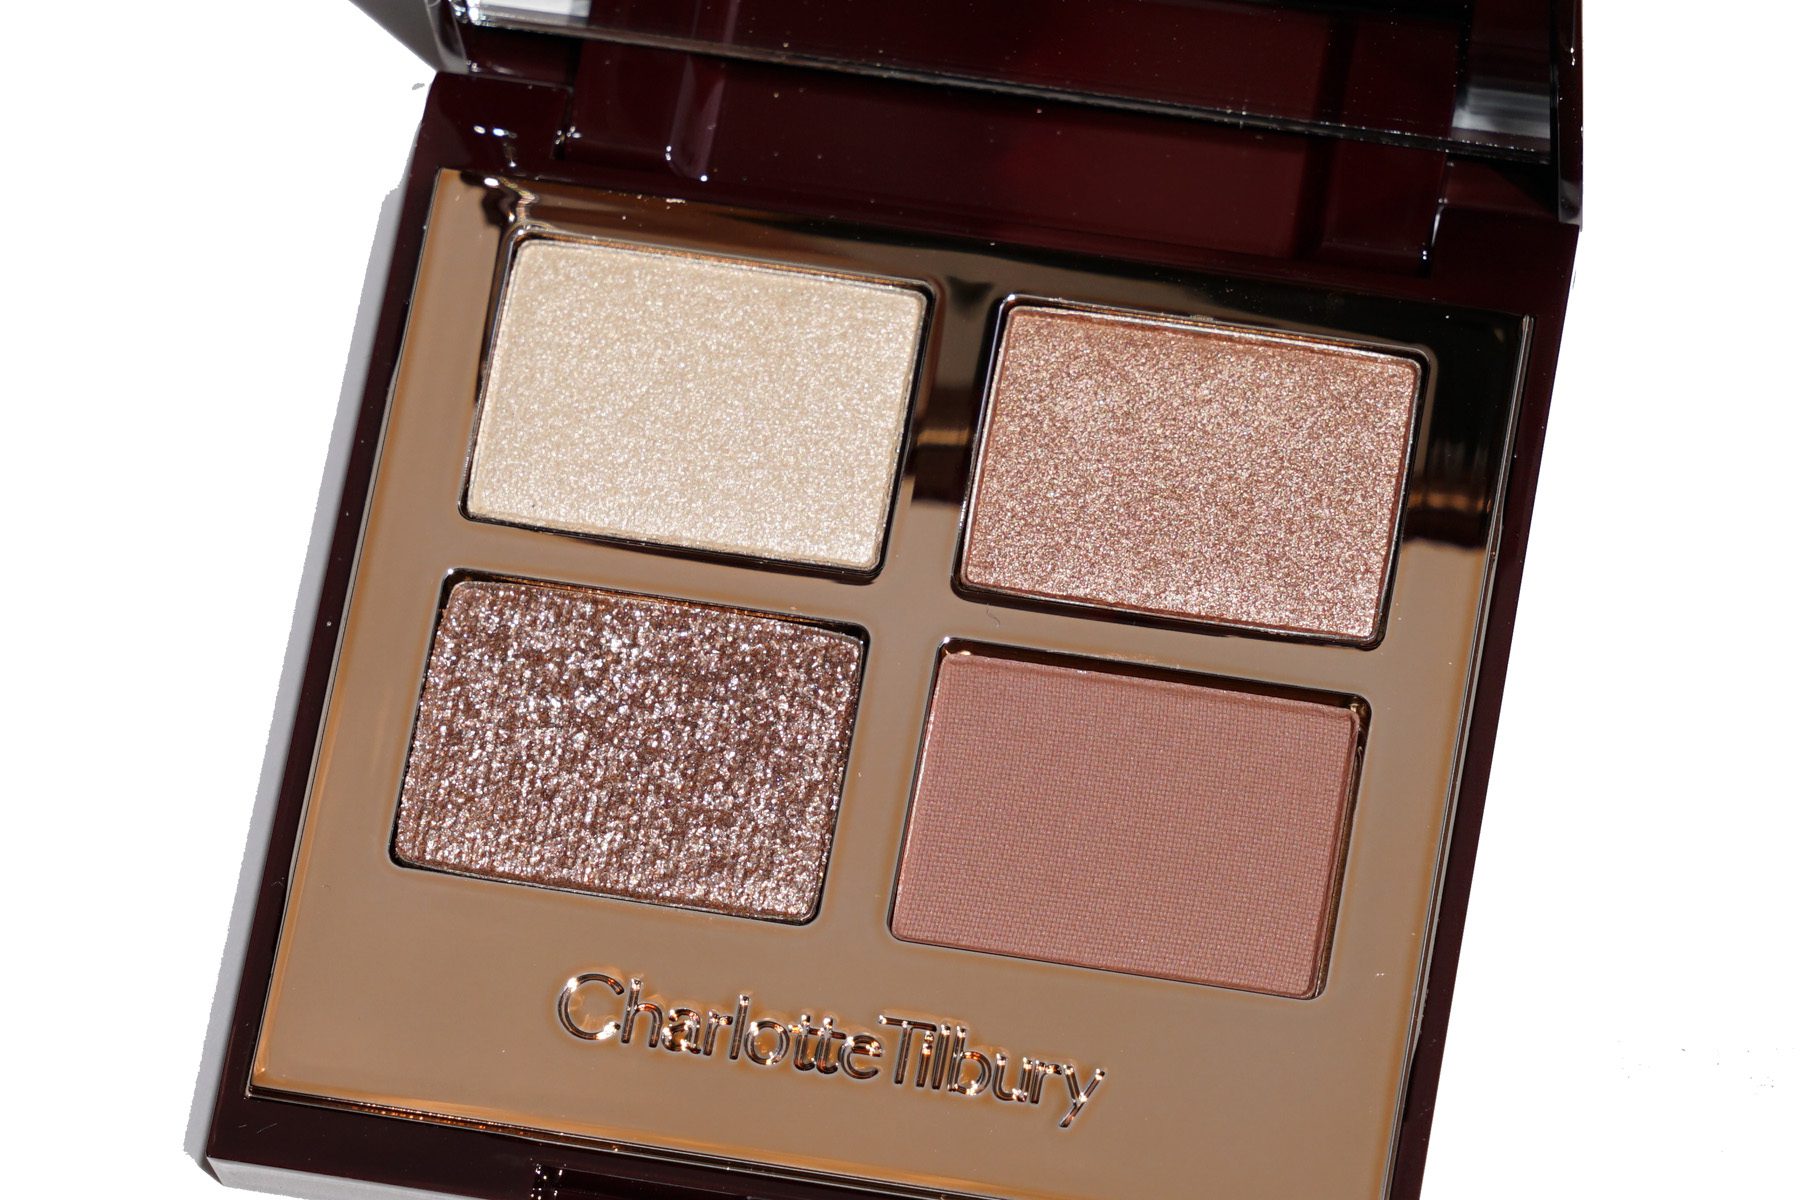 Charlotte Tilbury Beauty Filter Collection Bigger Brighter Eyes - The